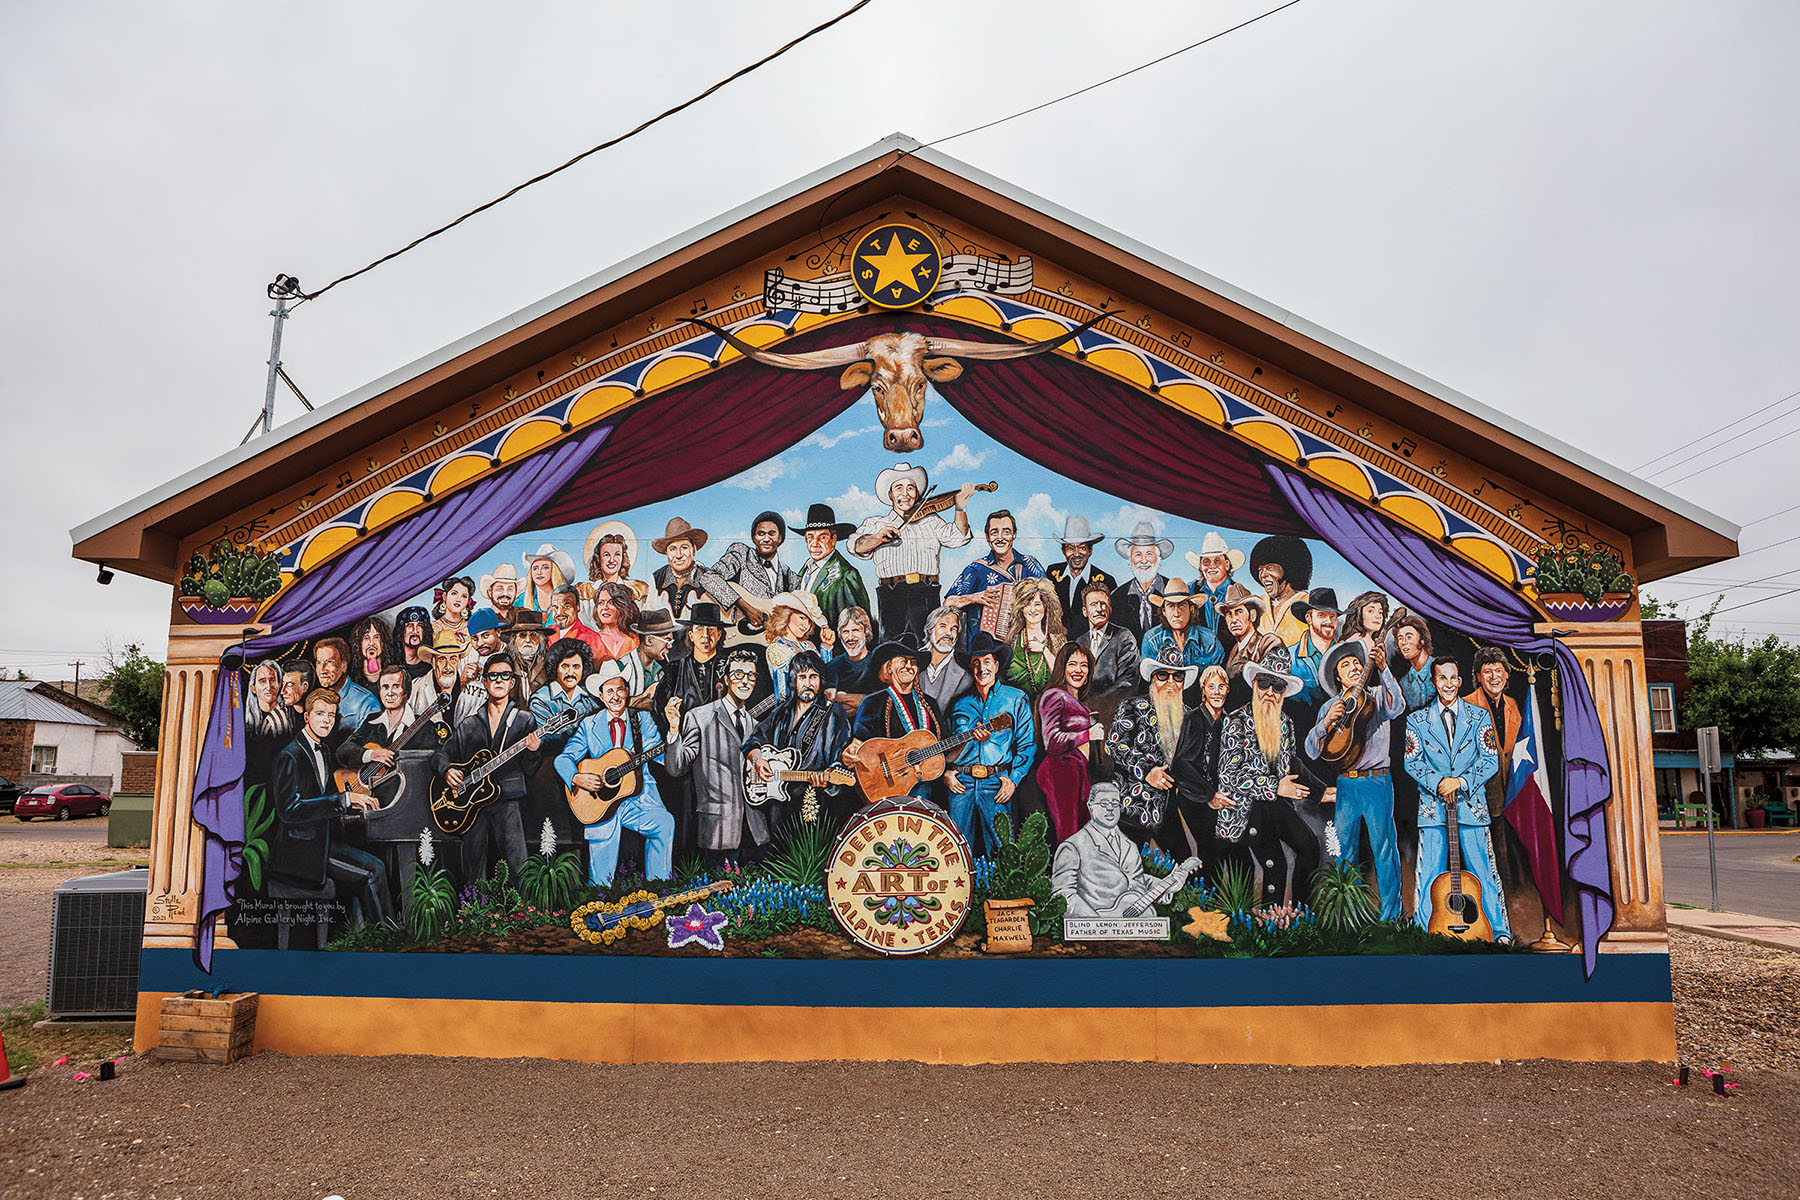 A brightly-colored painted mural of numerous famous Texas artists on a street corner